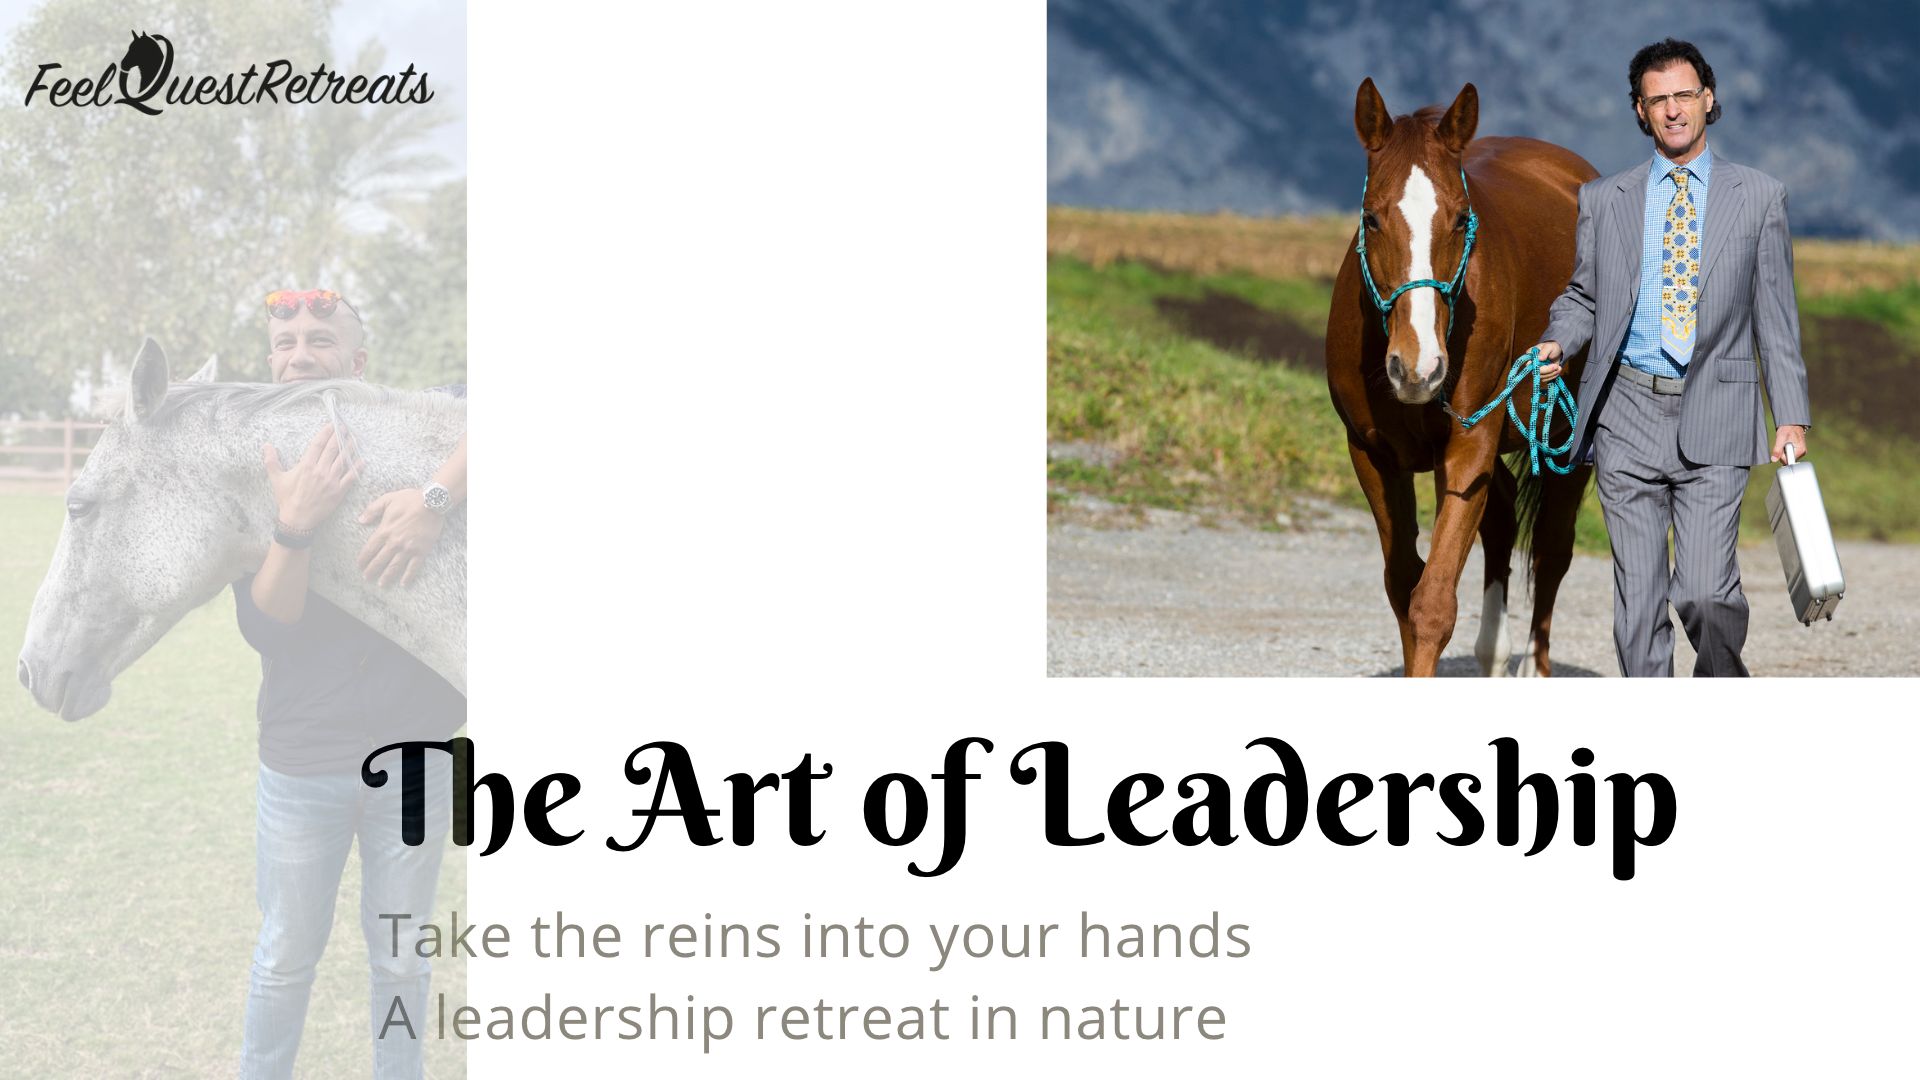 Leadership wellness retreats with horses - in Dubai, the Austrian Alps, Zanzibar or the UK. Let us take your leaders on a FeelQuest journey!